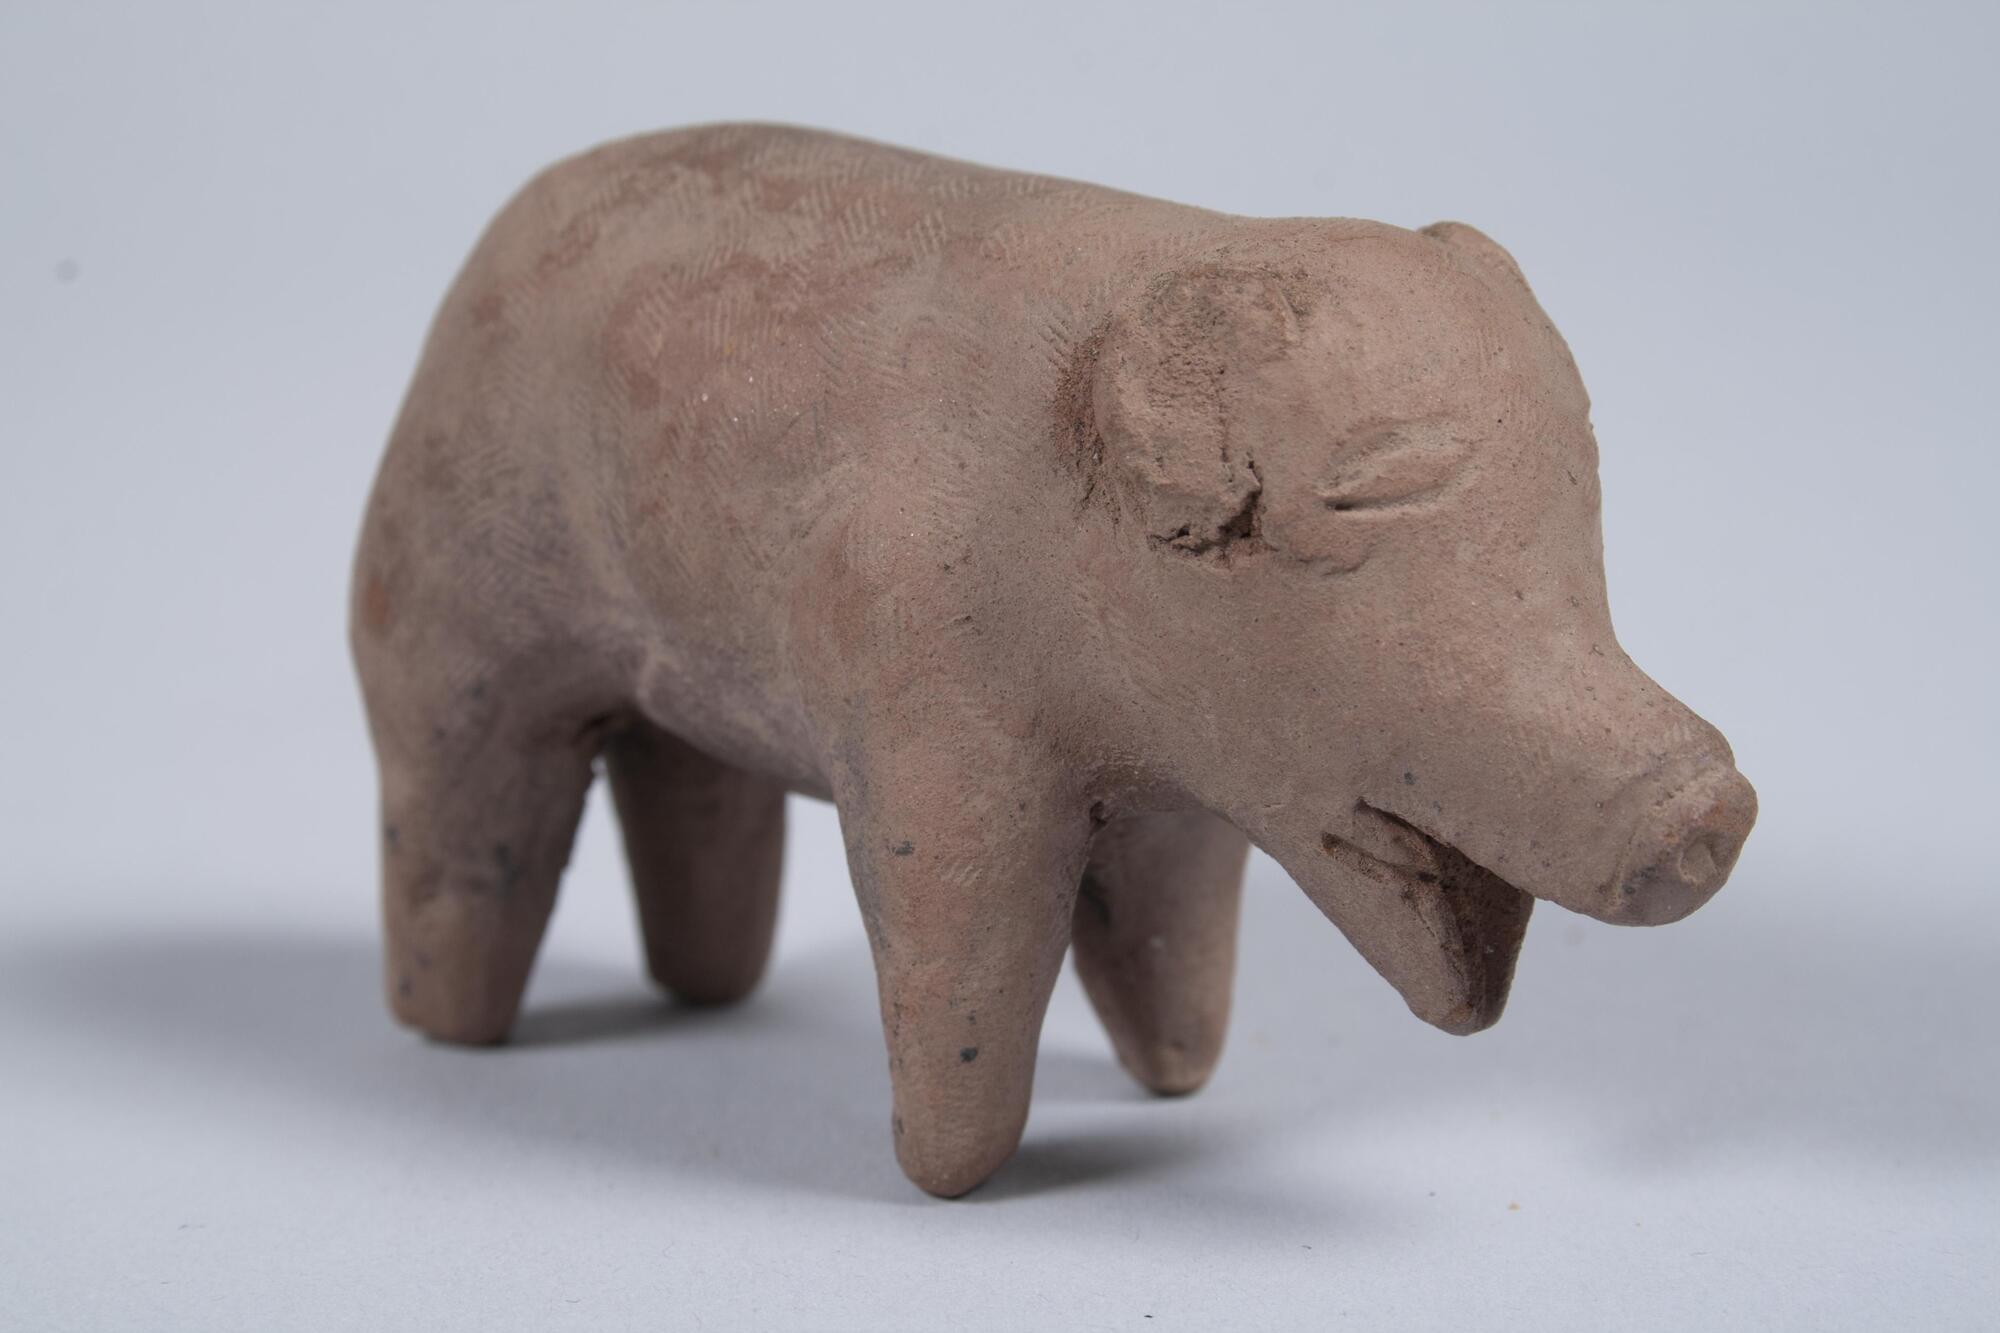 A small figurine of a pig with its mouth open. It is standing with four legs apart and the ears are down.